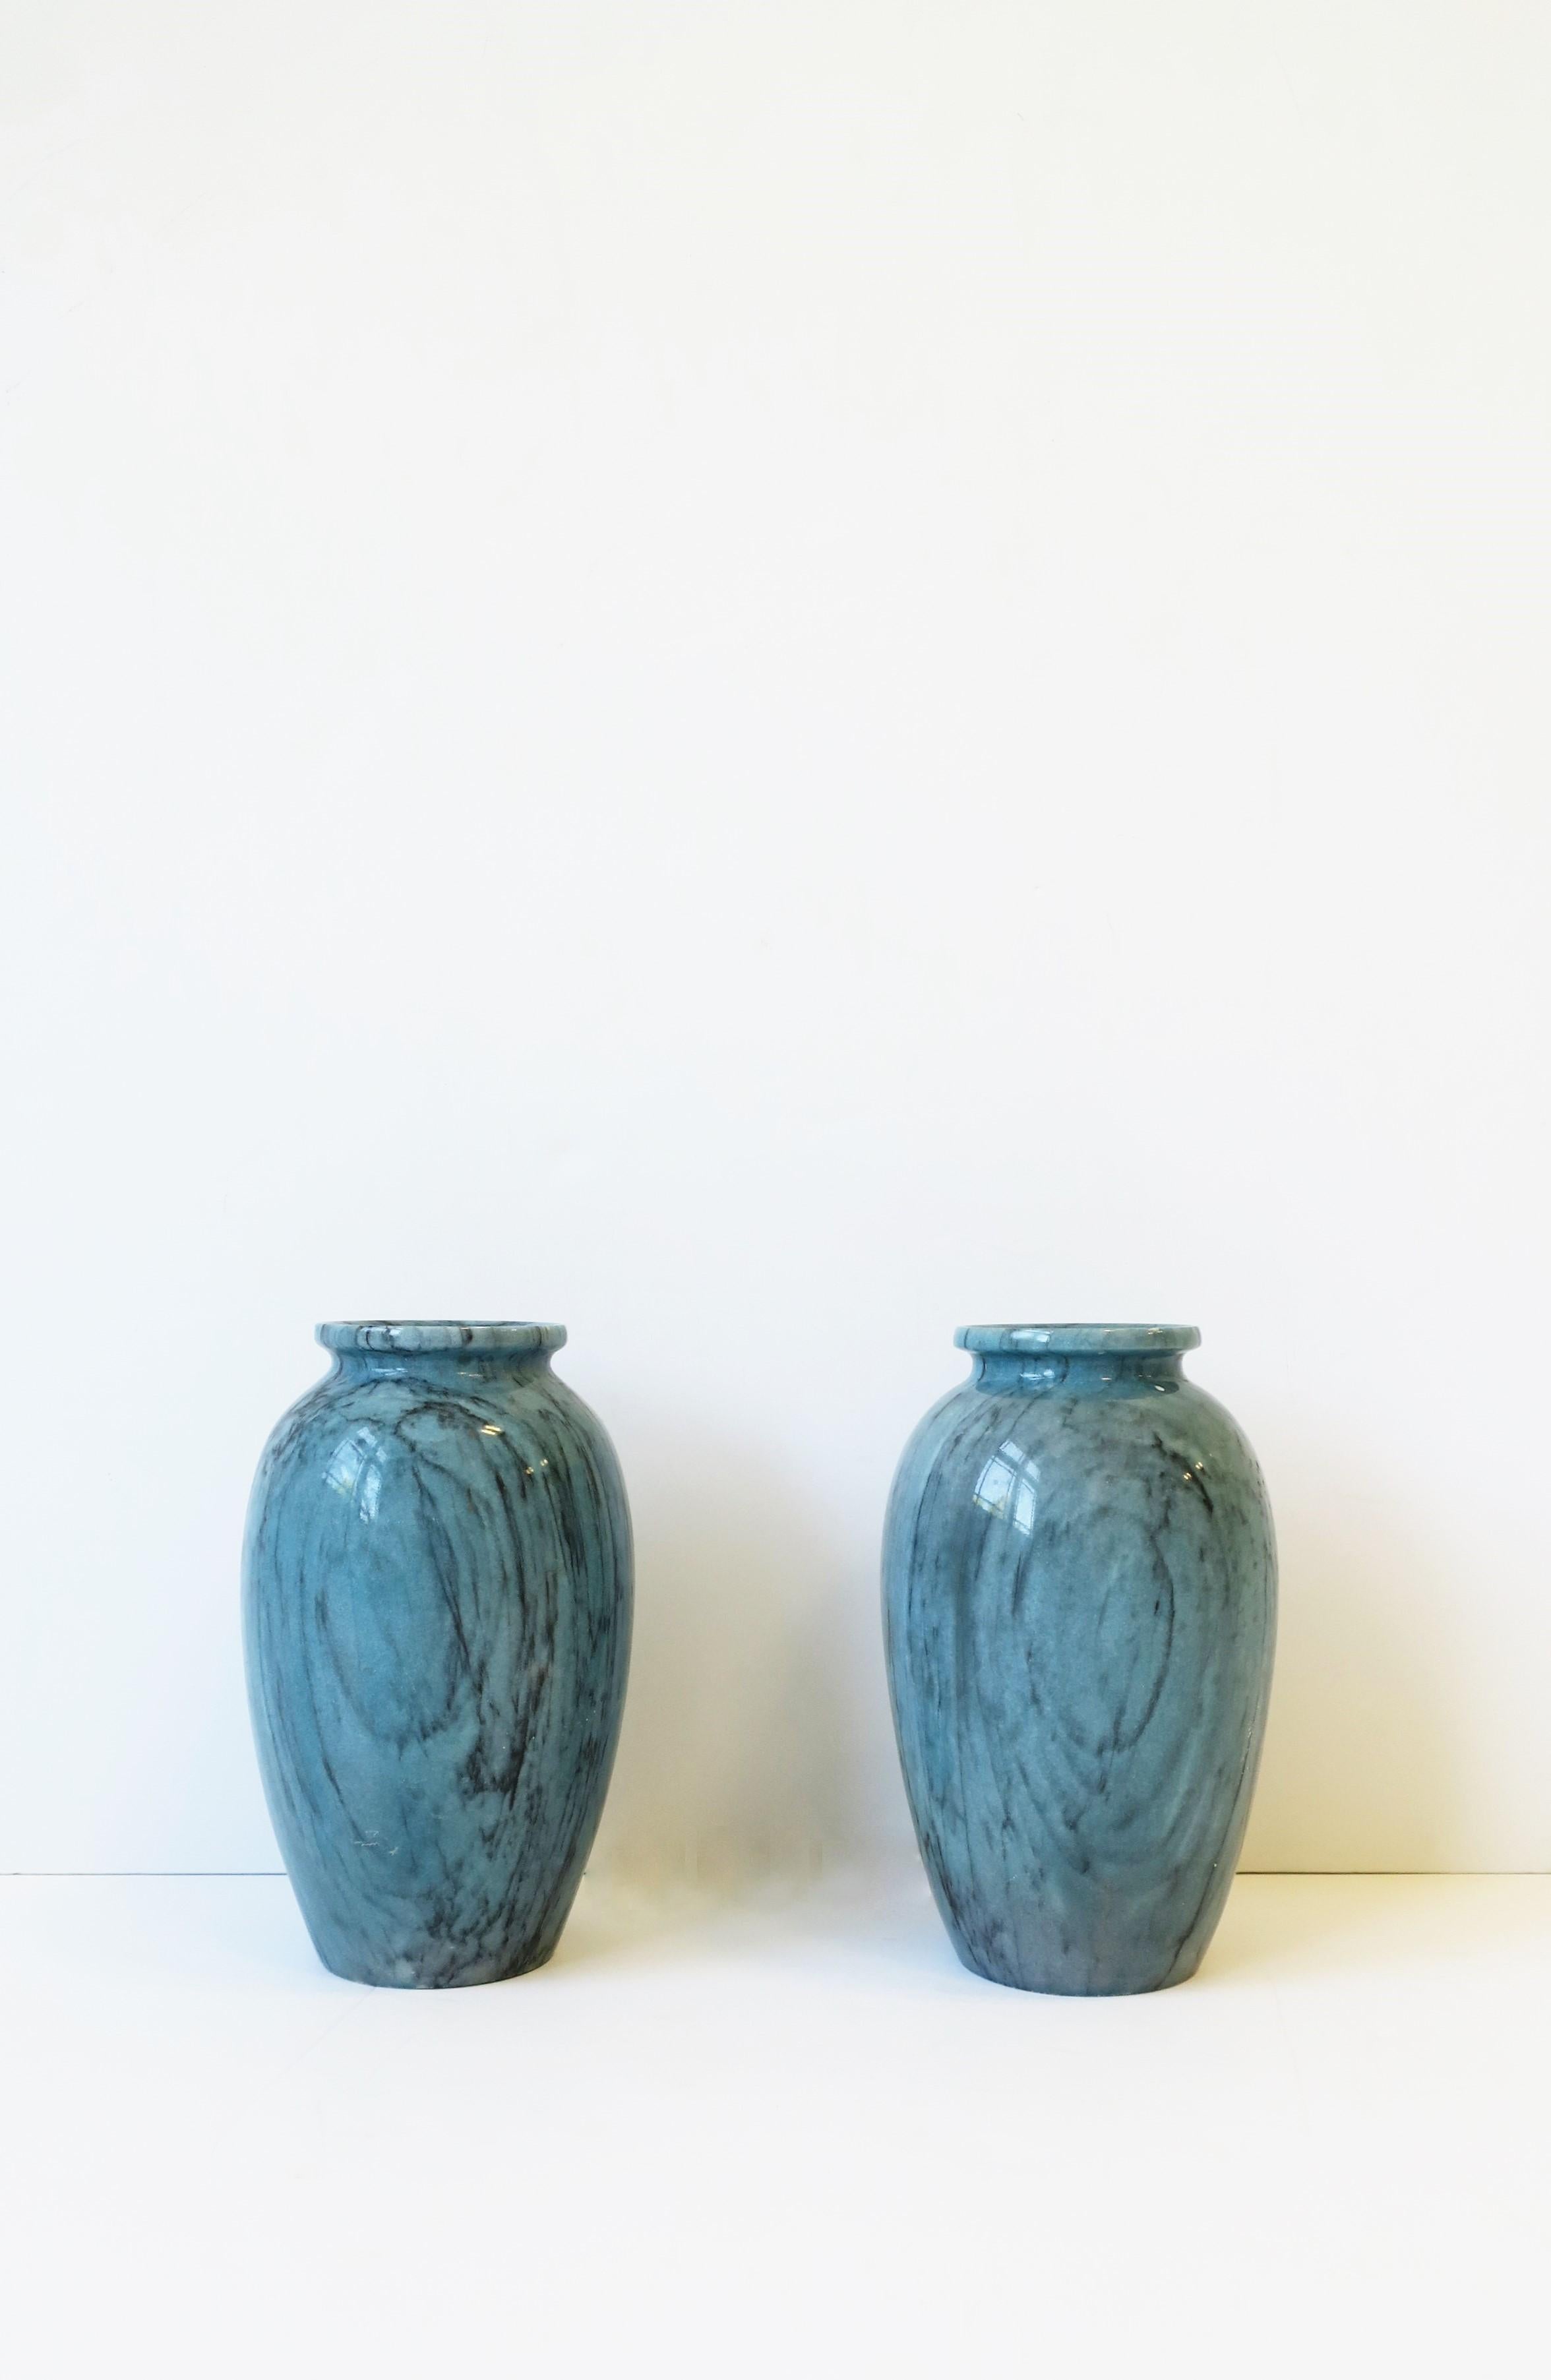 A beautiful and substantial pair of urn style blue marble vases, circa mid-20th century, Italy. Marble has black veining and is beautifully carved and polished smooth. Dimensions: 8.25